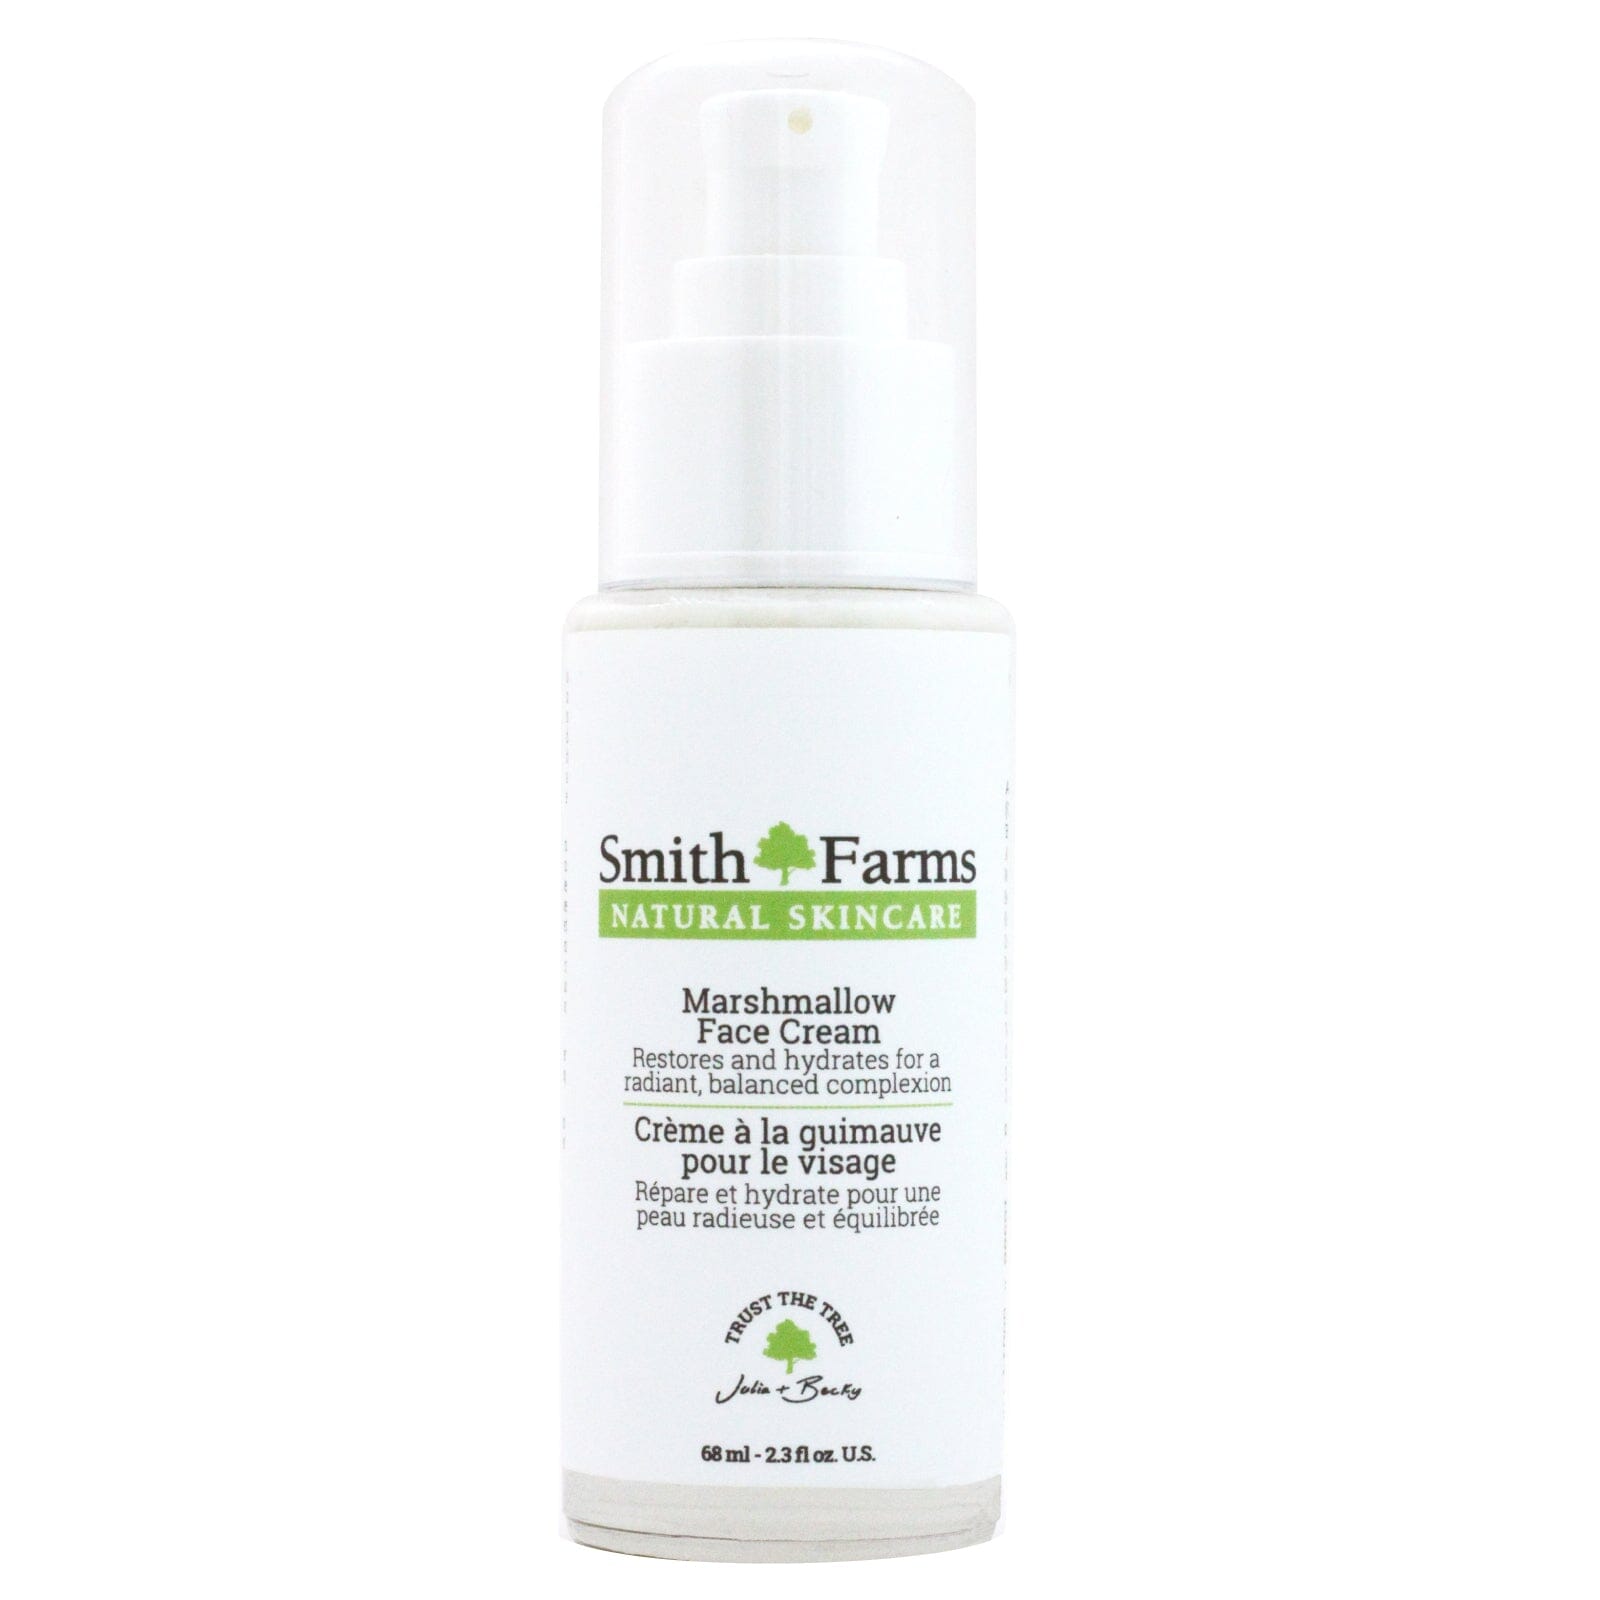 Marshmallow Face Cream Face Care, Our Products Smith Farms 68 ml 